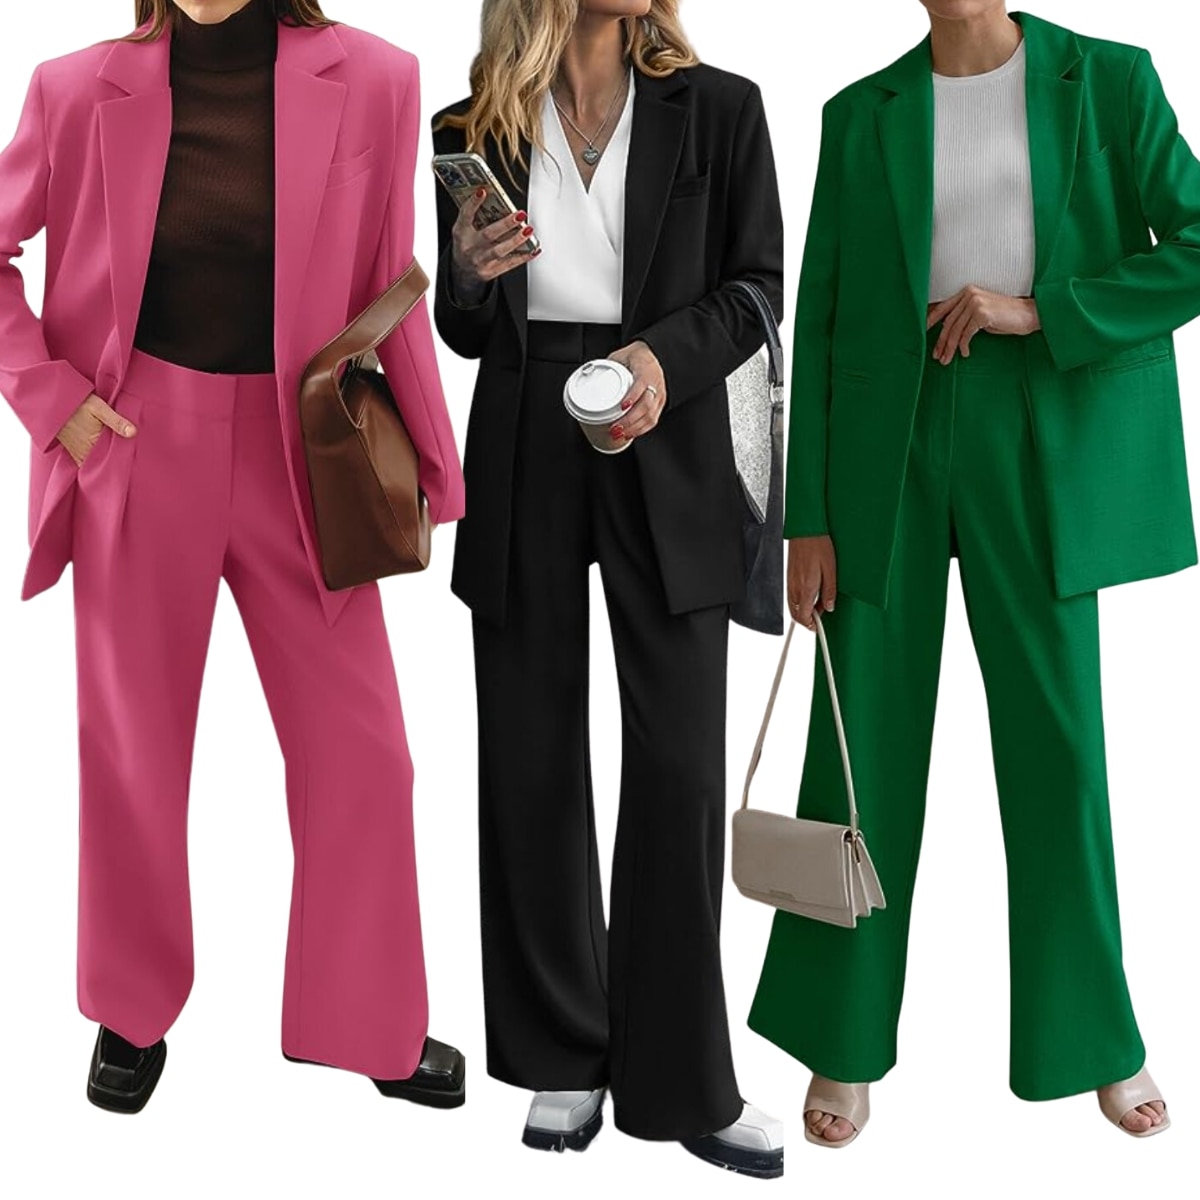 Buy Womens Business Work Suit Set Blazer Pants for Office Lady Suit Set  Slim Fit Blazer Pant at Amazon.in